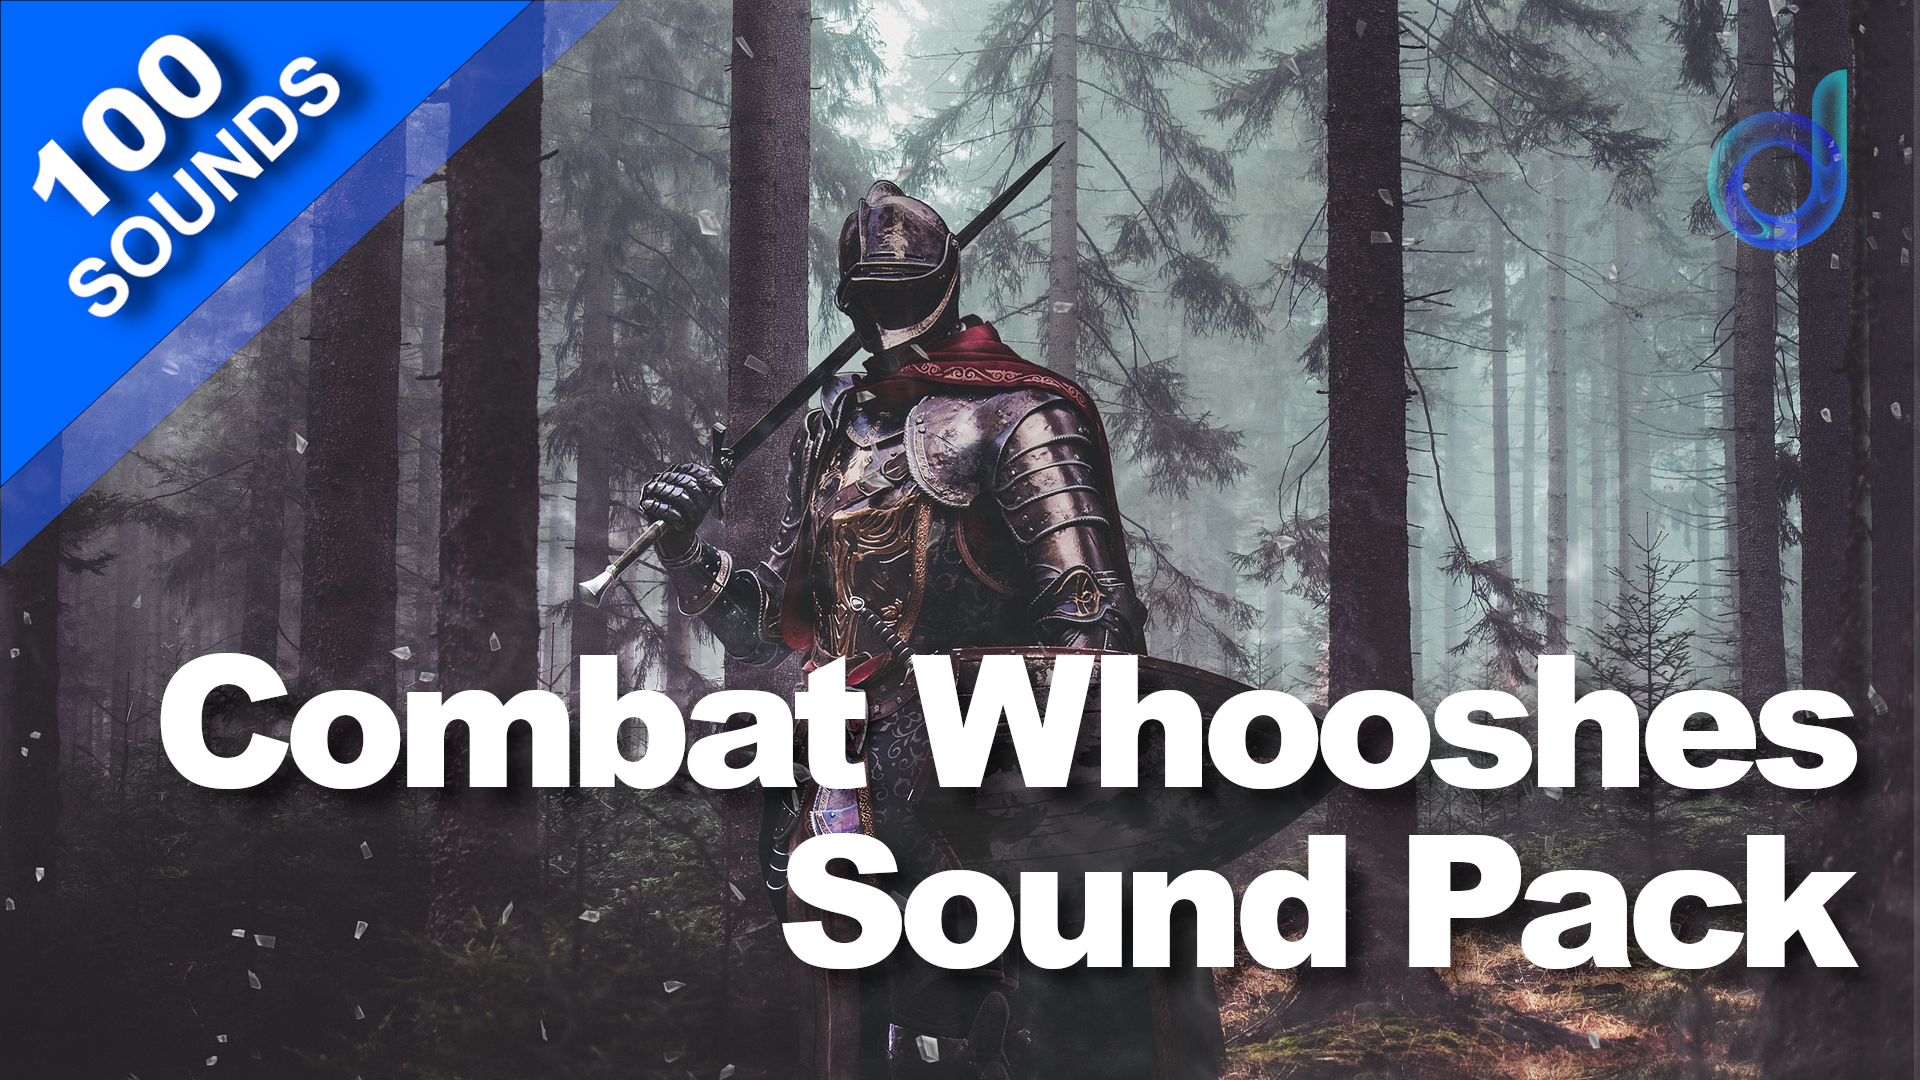 Combat Whooshes Sound Pack